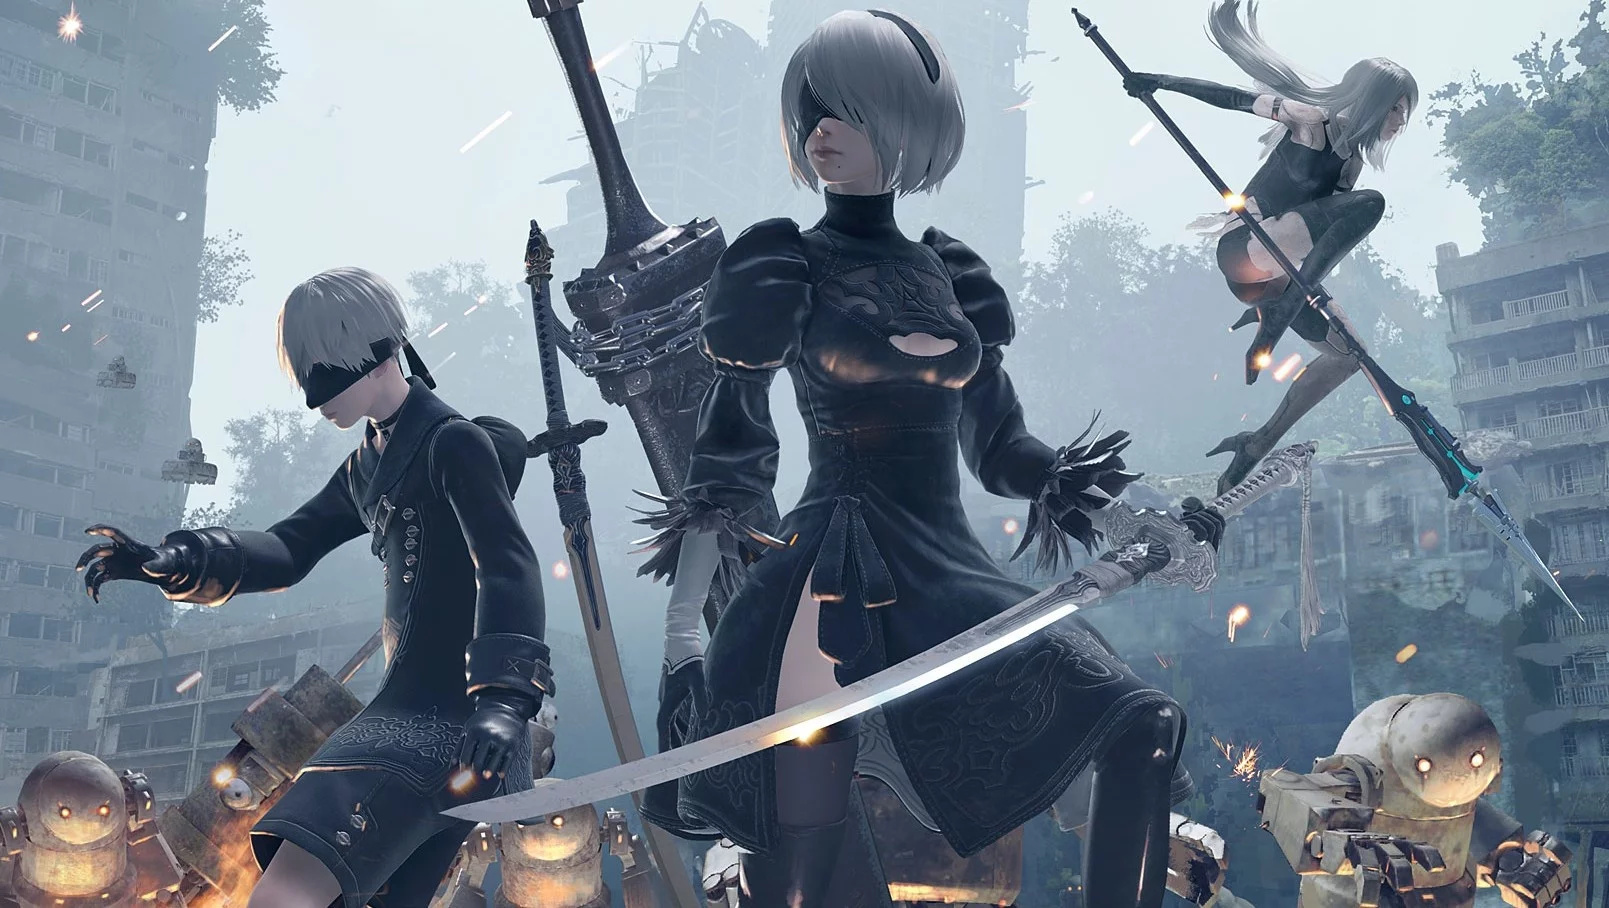 Random Twitter Almost Thought 2b From Nier Automata Was Confirmed For Smash Nintendo Life